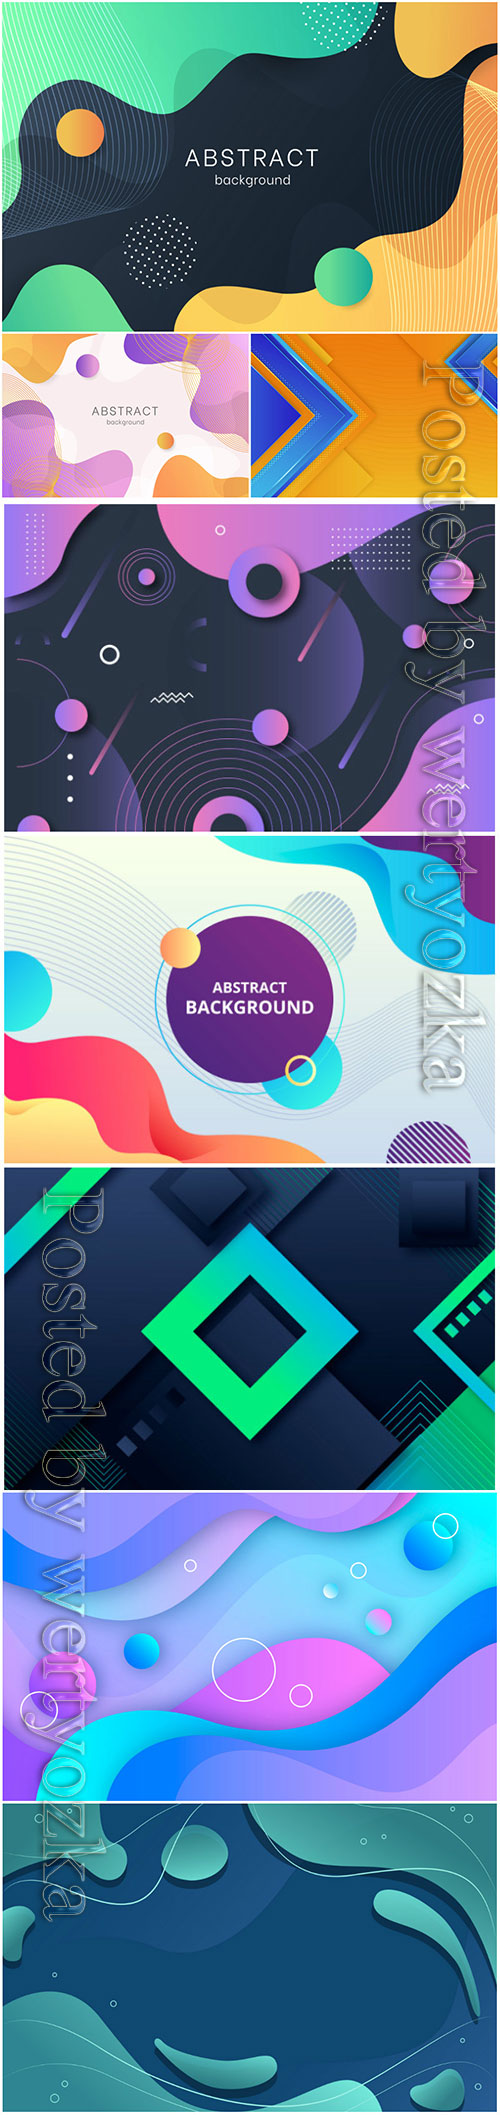 Luxury abstract backgrounds in vector # 3